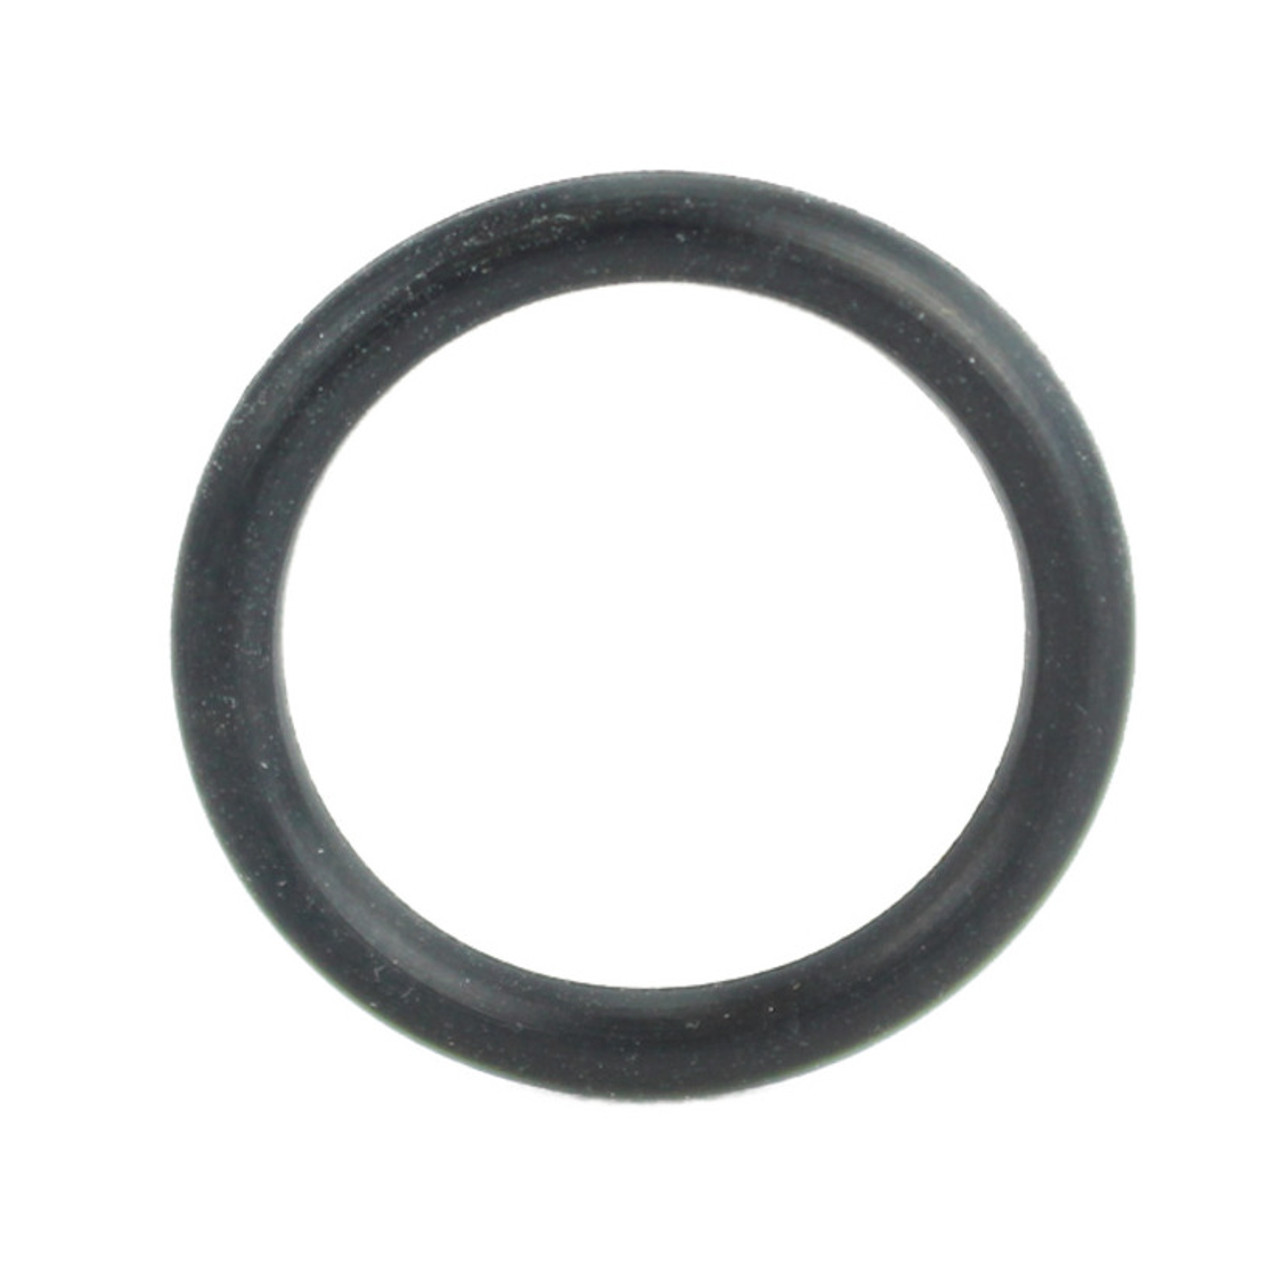 This is a high quality rubber replacement o-ring for the case connector in GM TH400, TH350, 700R4, TH125 and TH250 automatic transmissions.